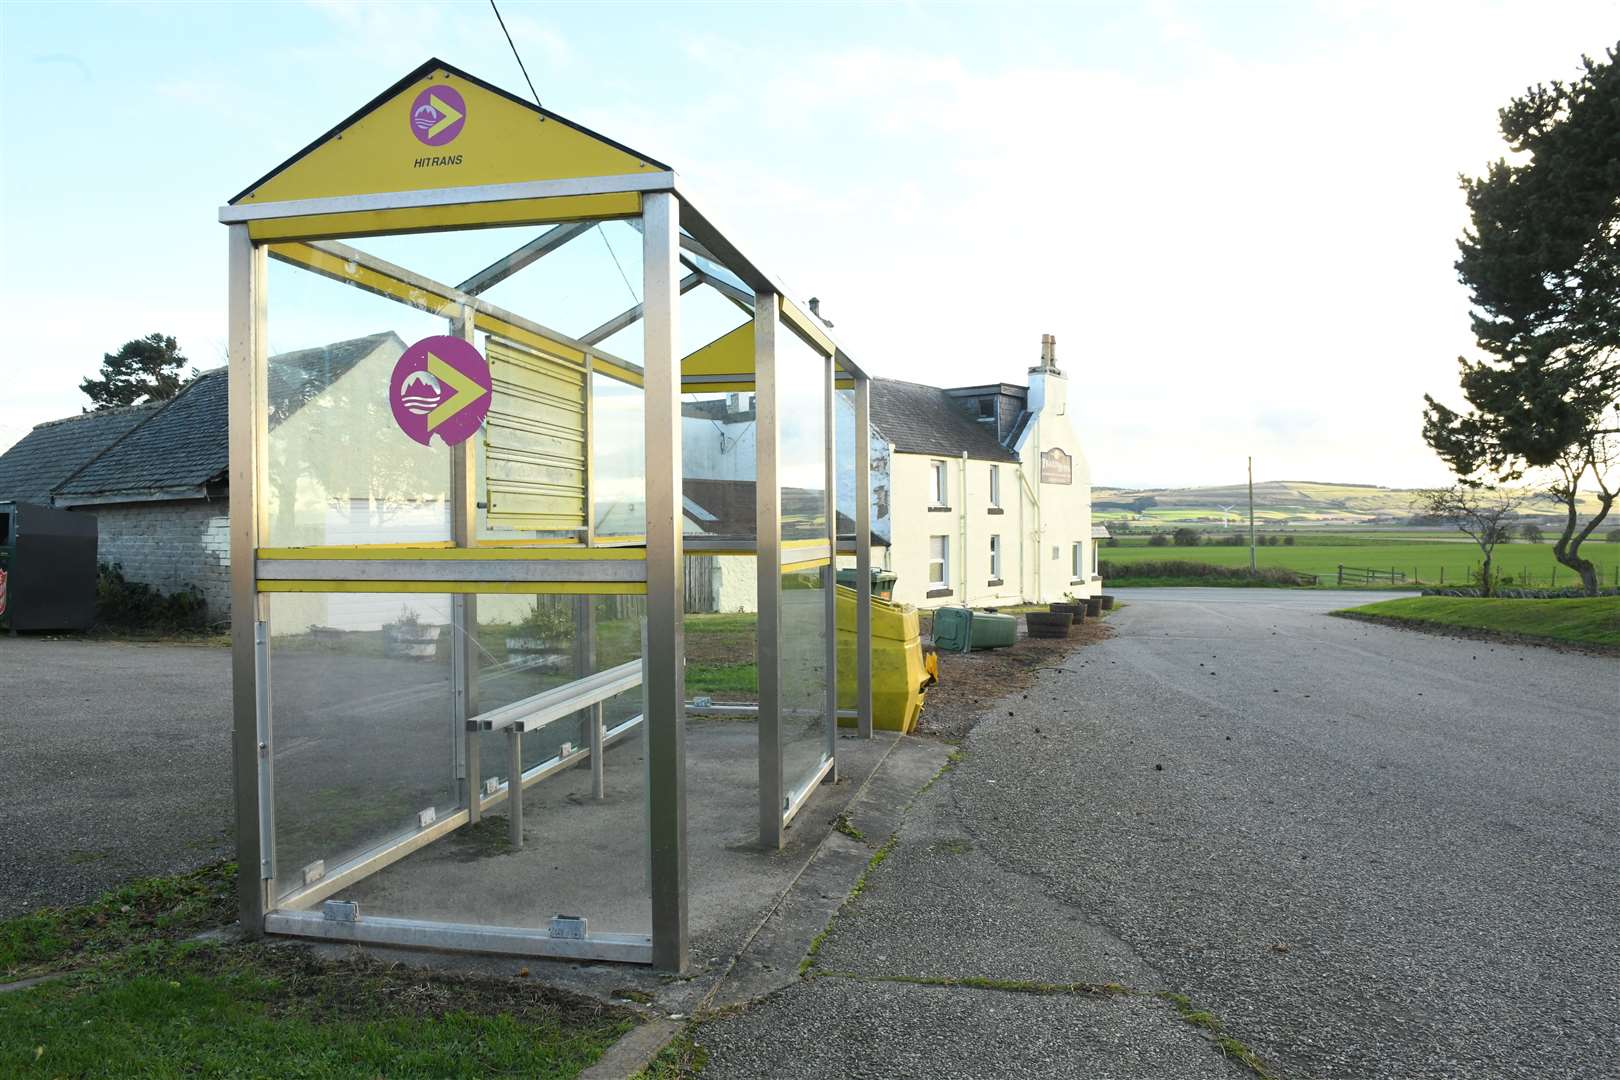 Views are being sought from the public on how transport can be improved in the Highlands and Islands.